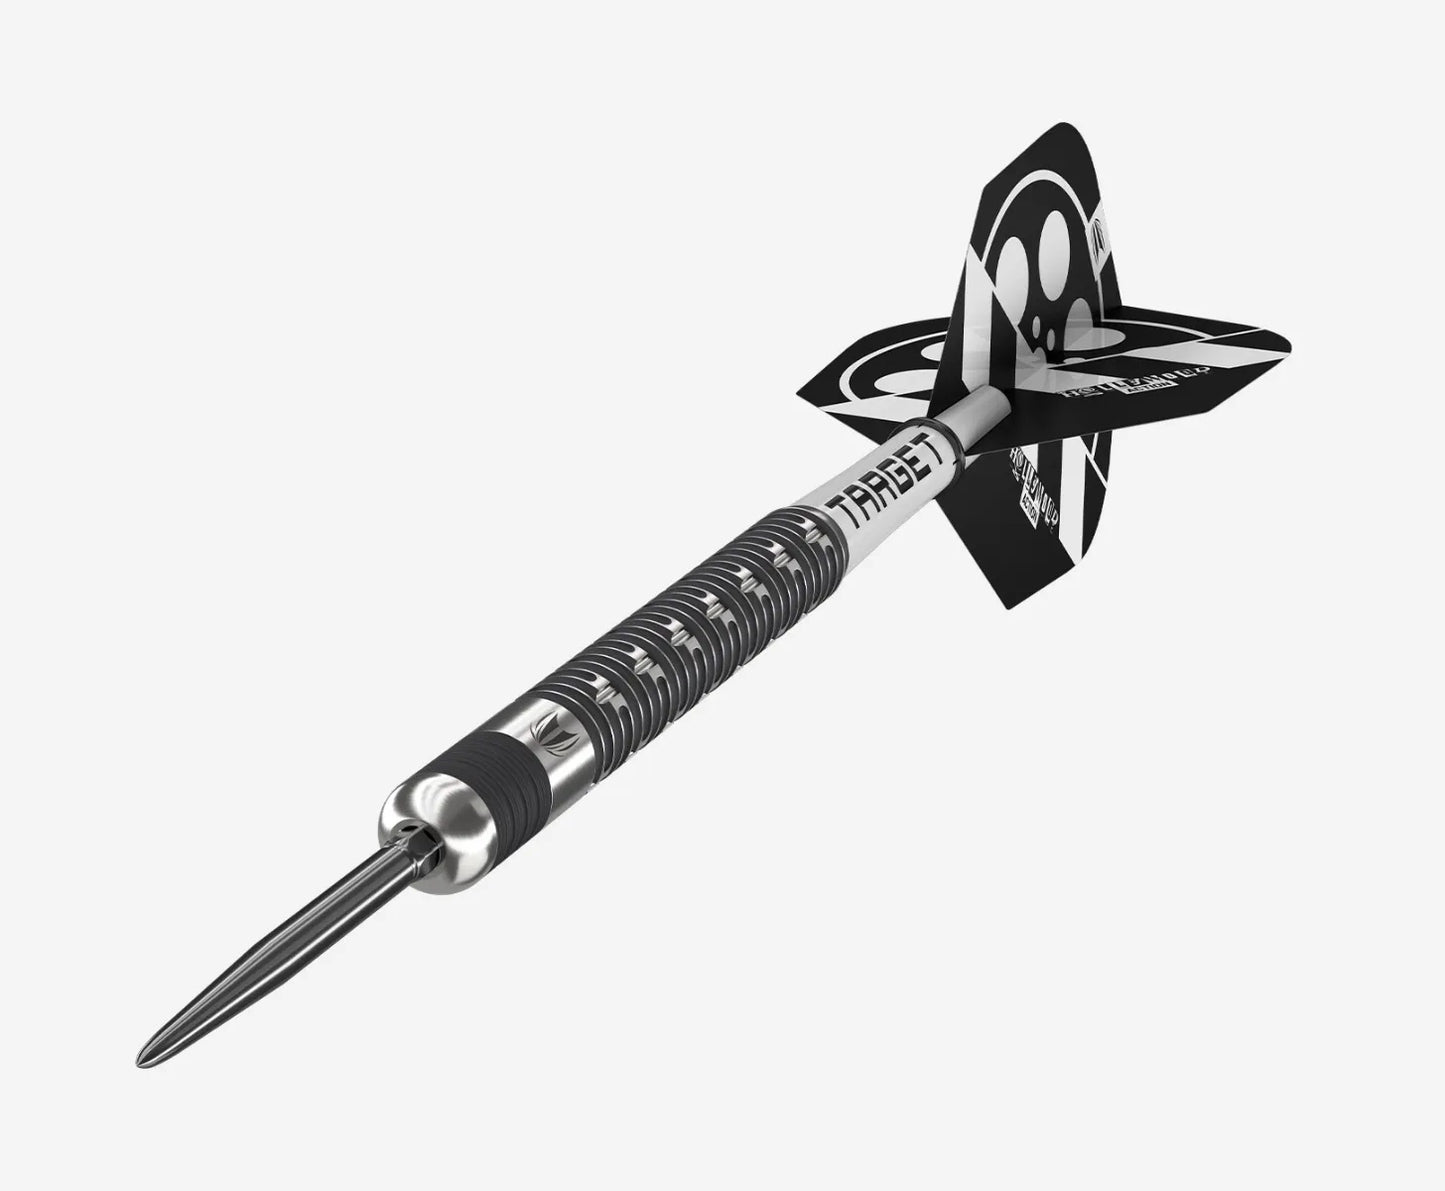 Target Chris Dobey Hollywood Action Swiss Points 90% Steeldarts 23g